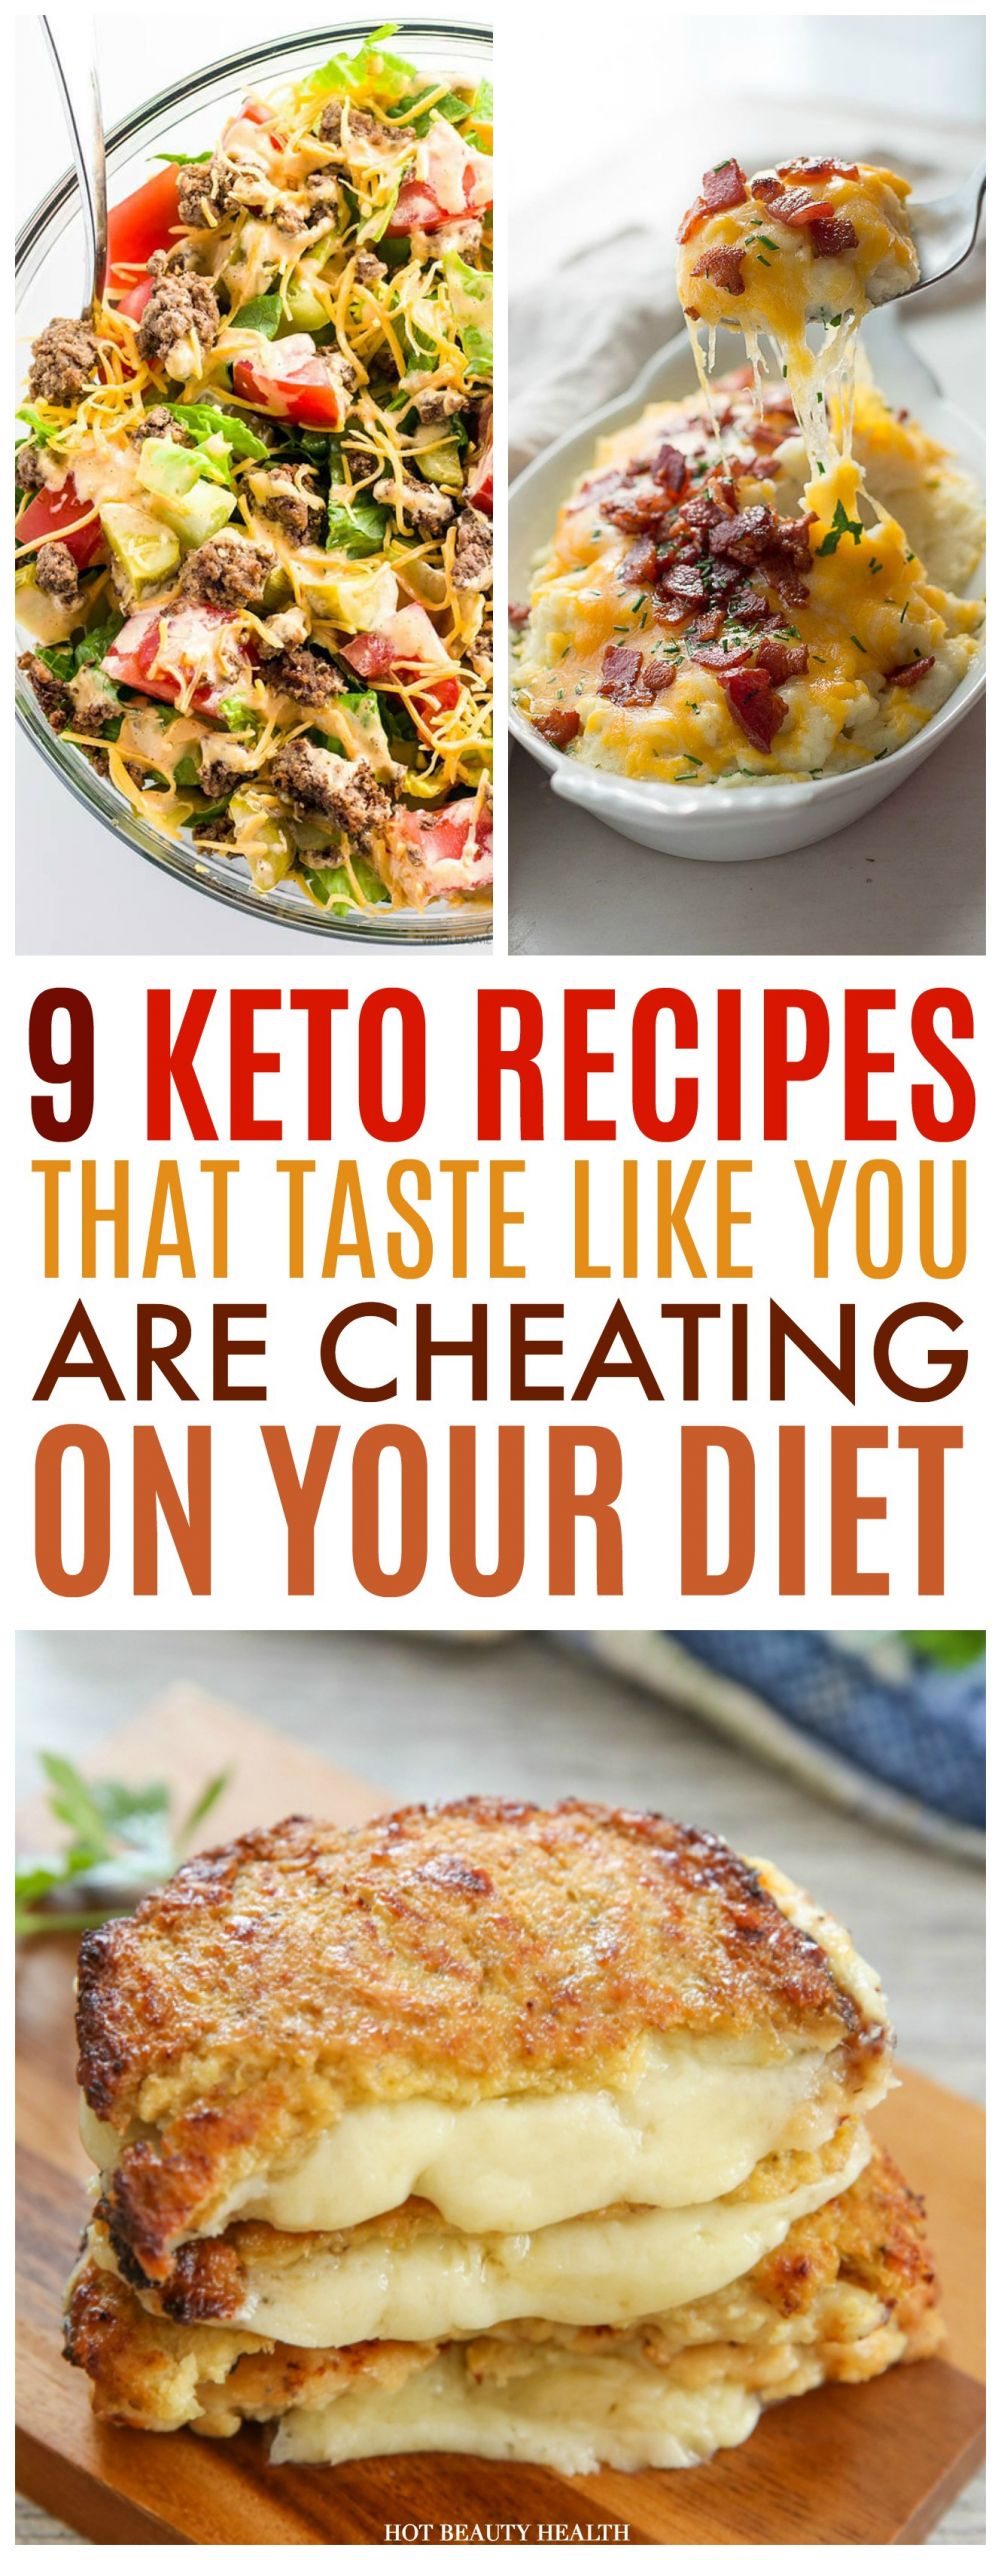 Keto Diet Food List Recipes
 9 Ketogenic Recipes For Anyone a Low Carb Diet Hot